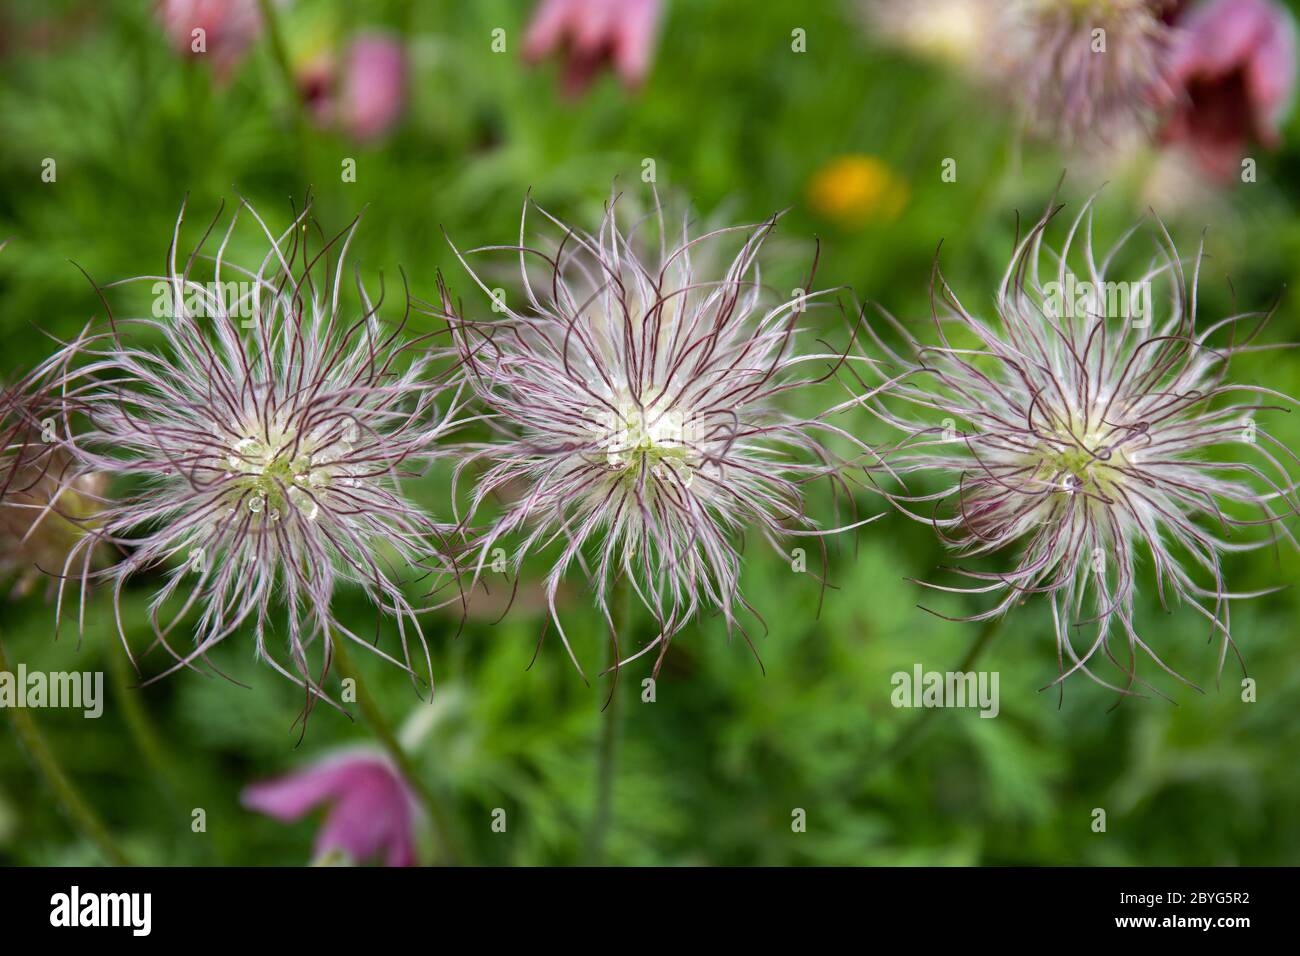 Dew droplets on fruits of Pulsatilla vulgaris, plant also known as pasqueflower, European pasqueflower, common pasqueflower and pasque flower Stock Photo